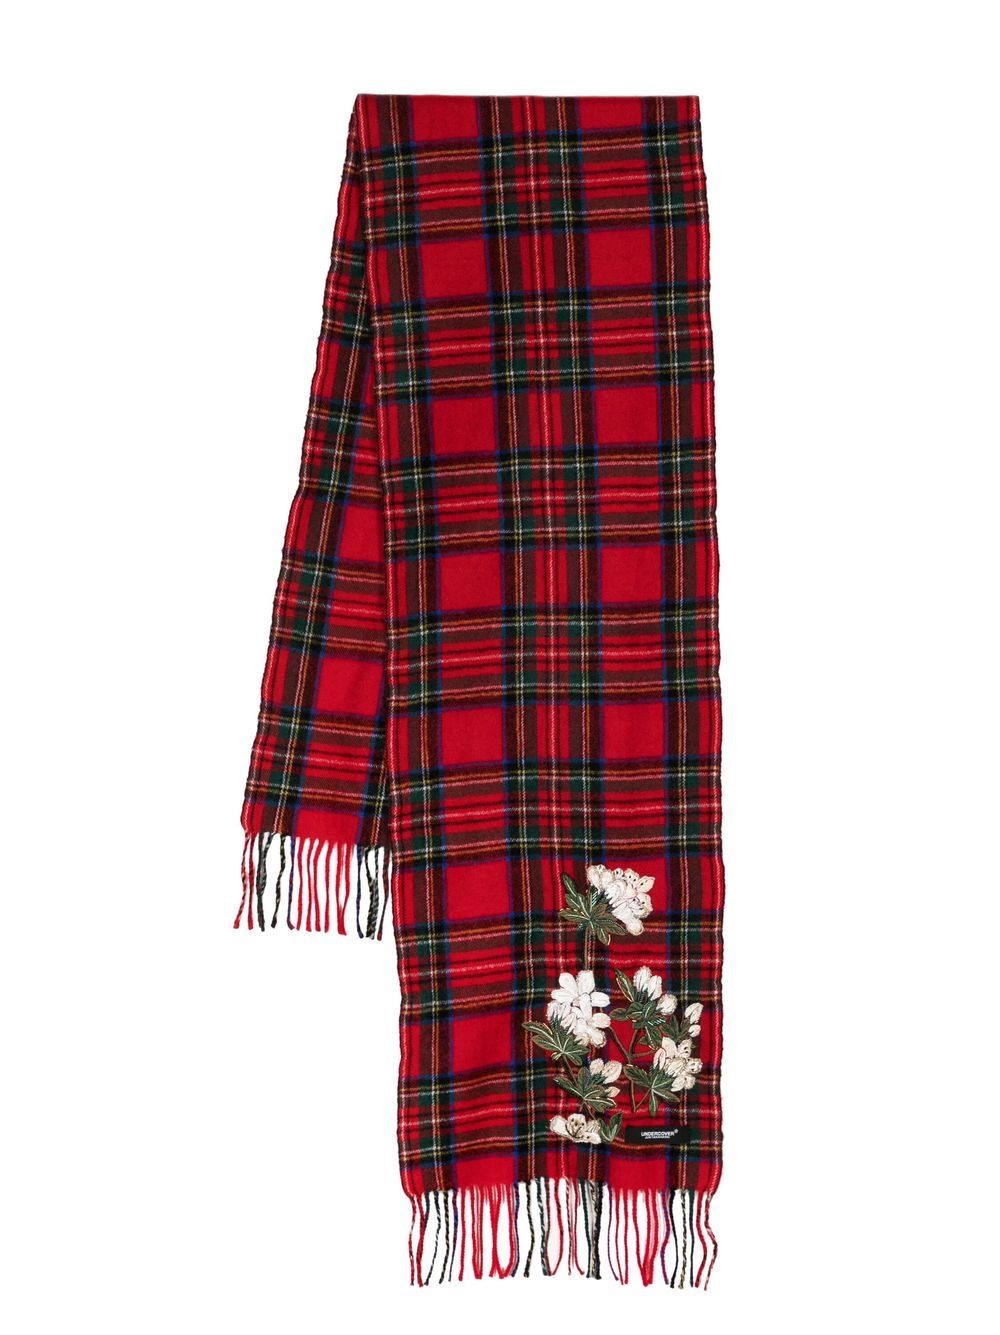 Undercover embroidered floral-print tartan scarf